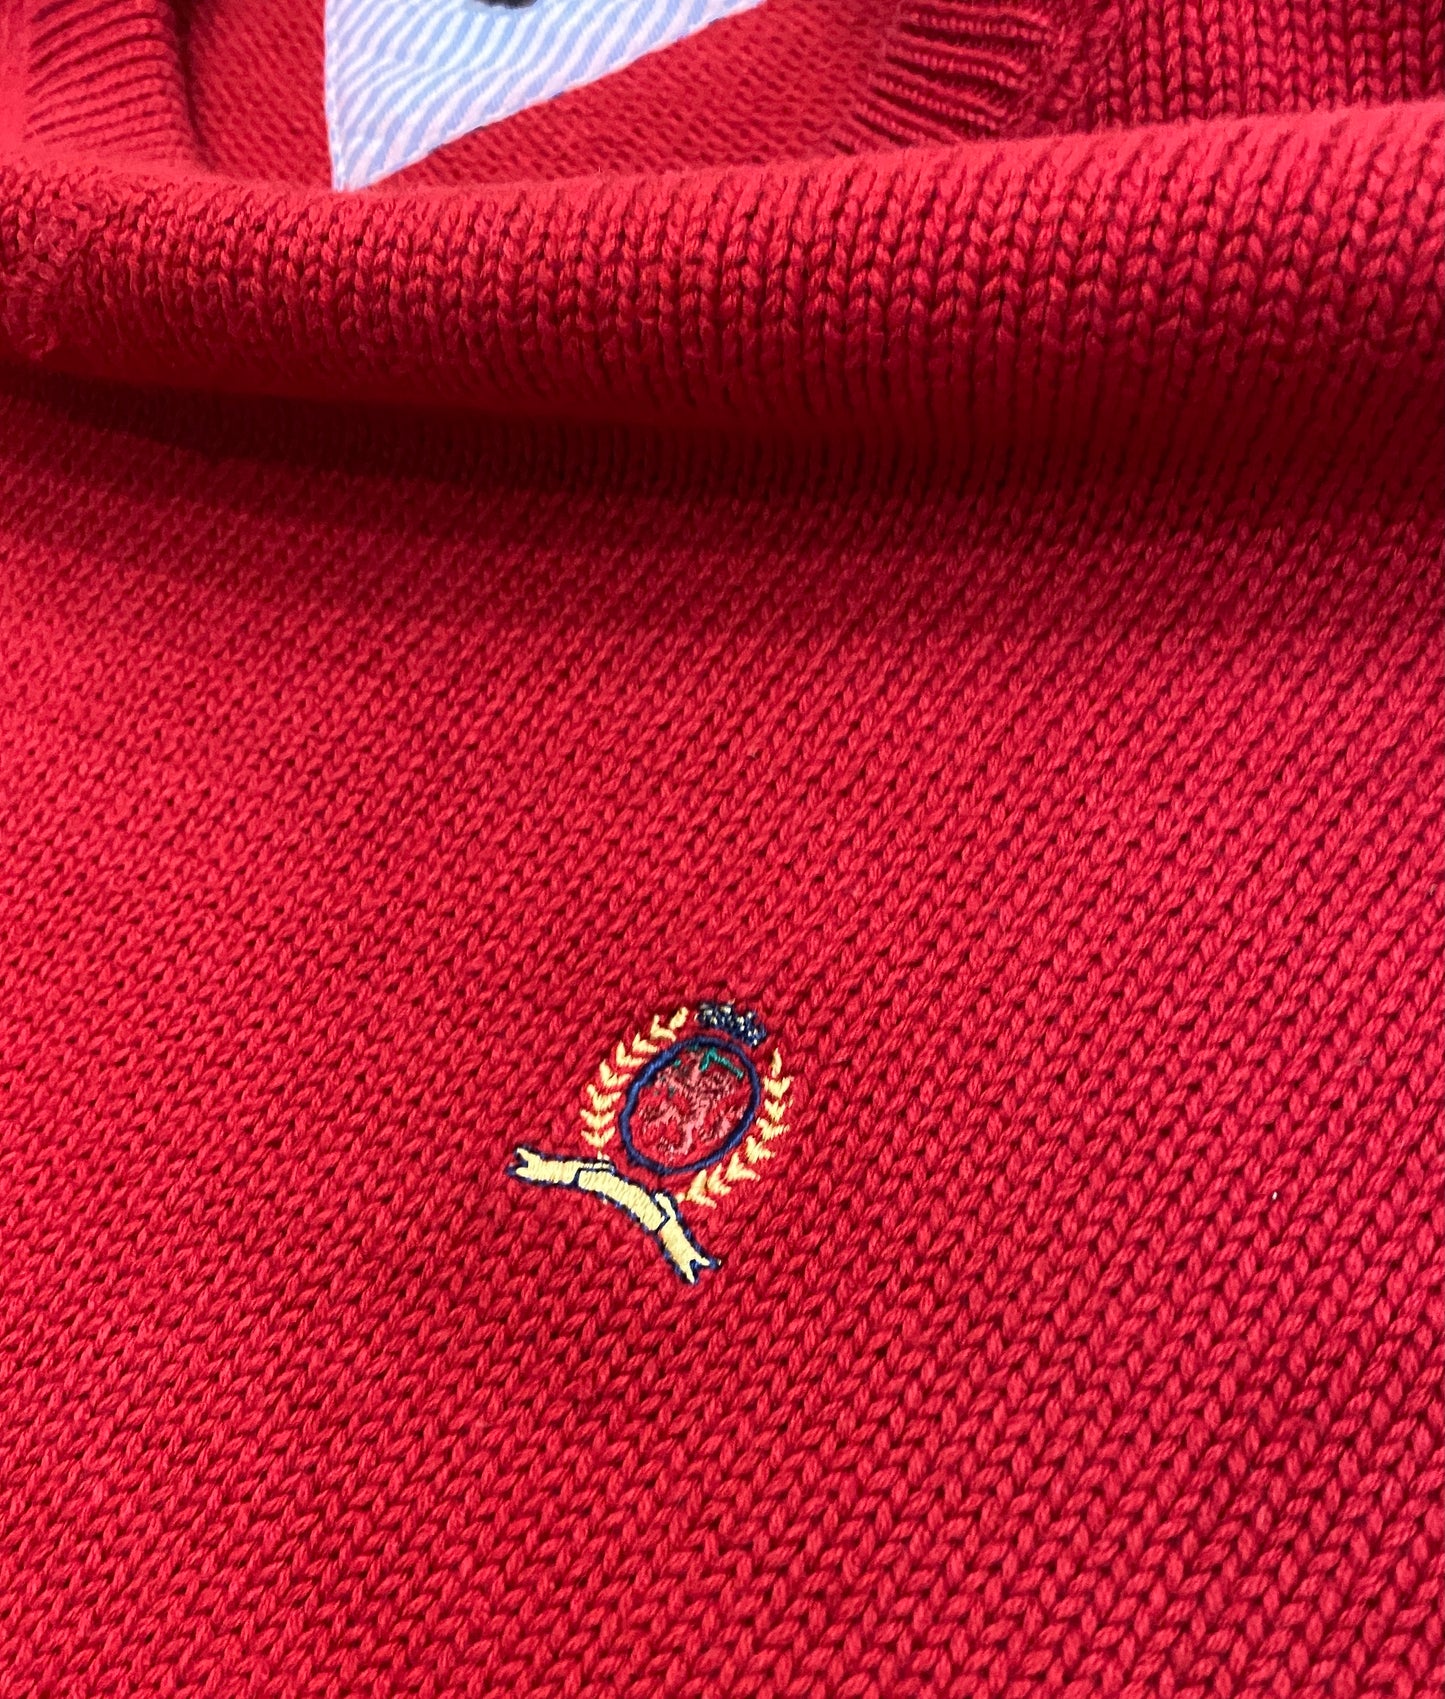 Tommy Hilfiger embroidered knit sweater (XL)